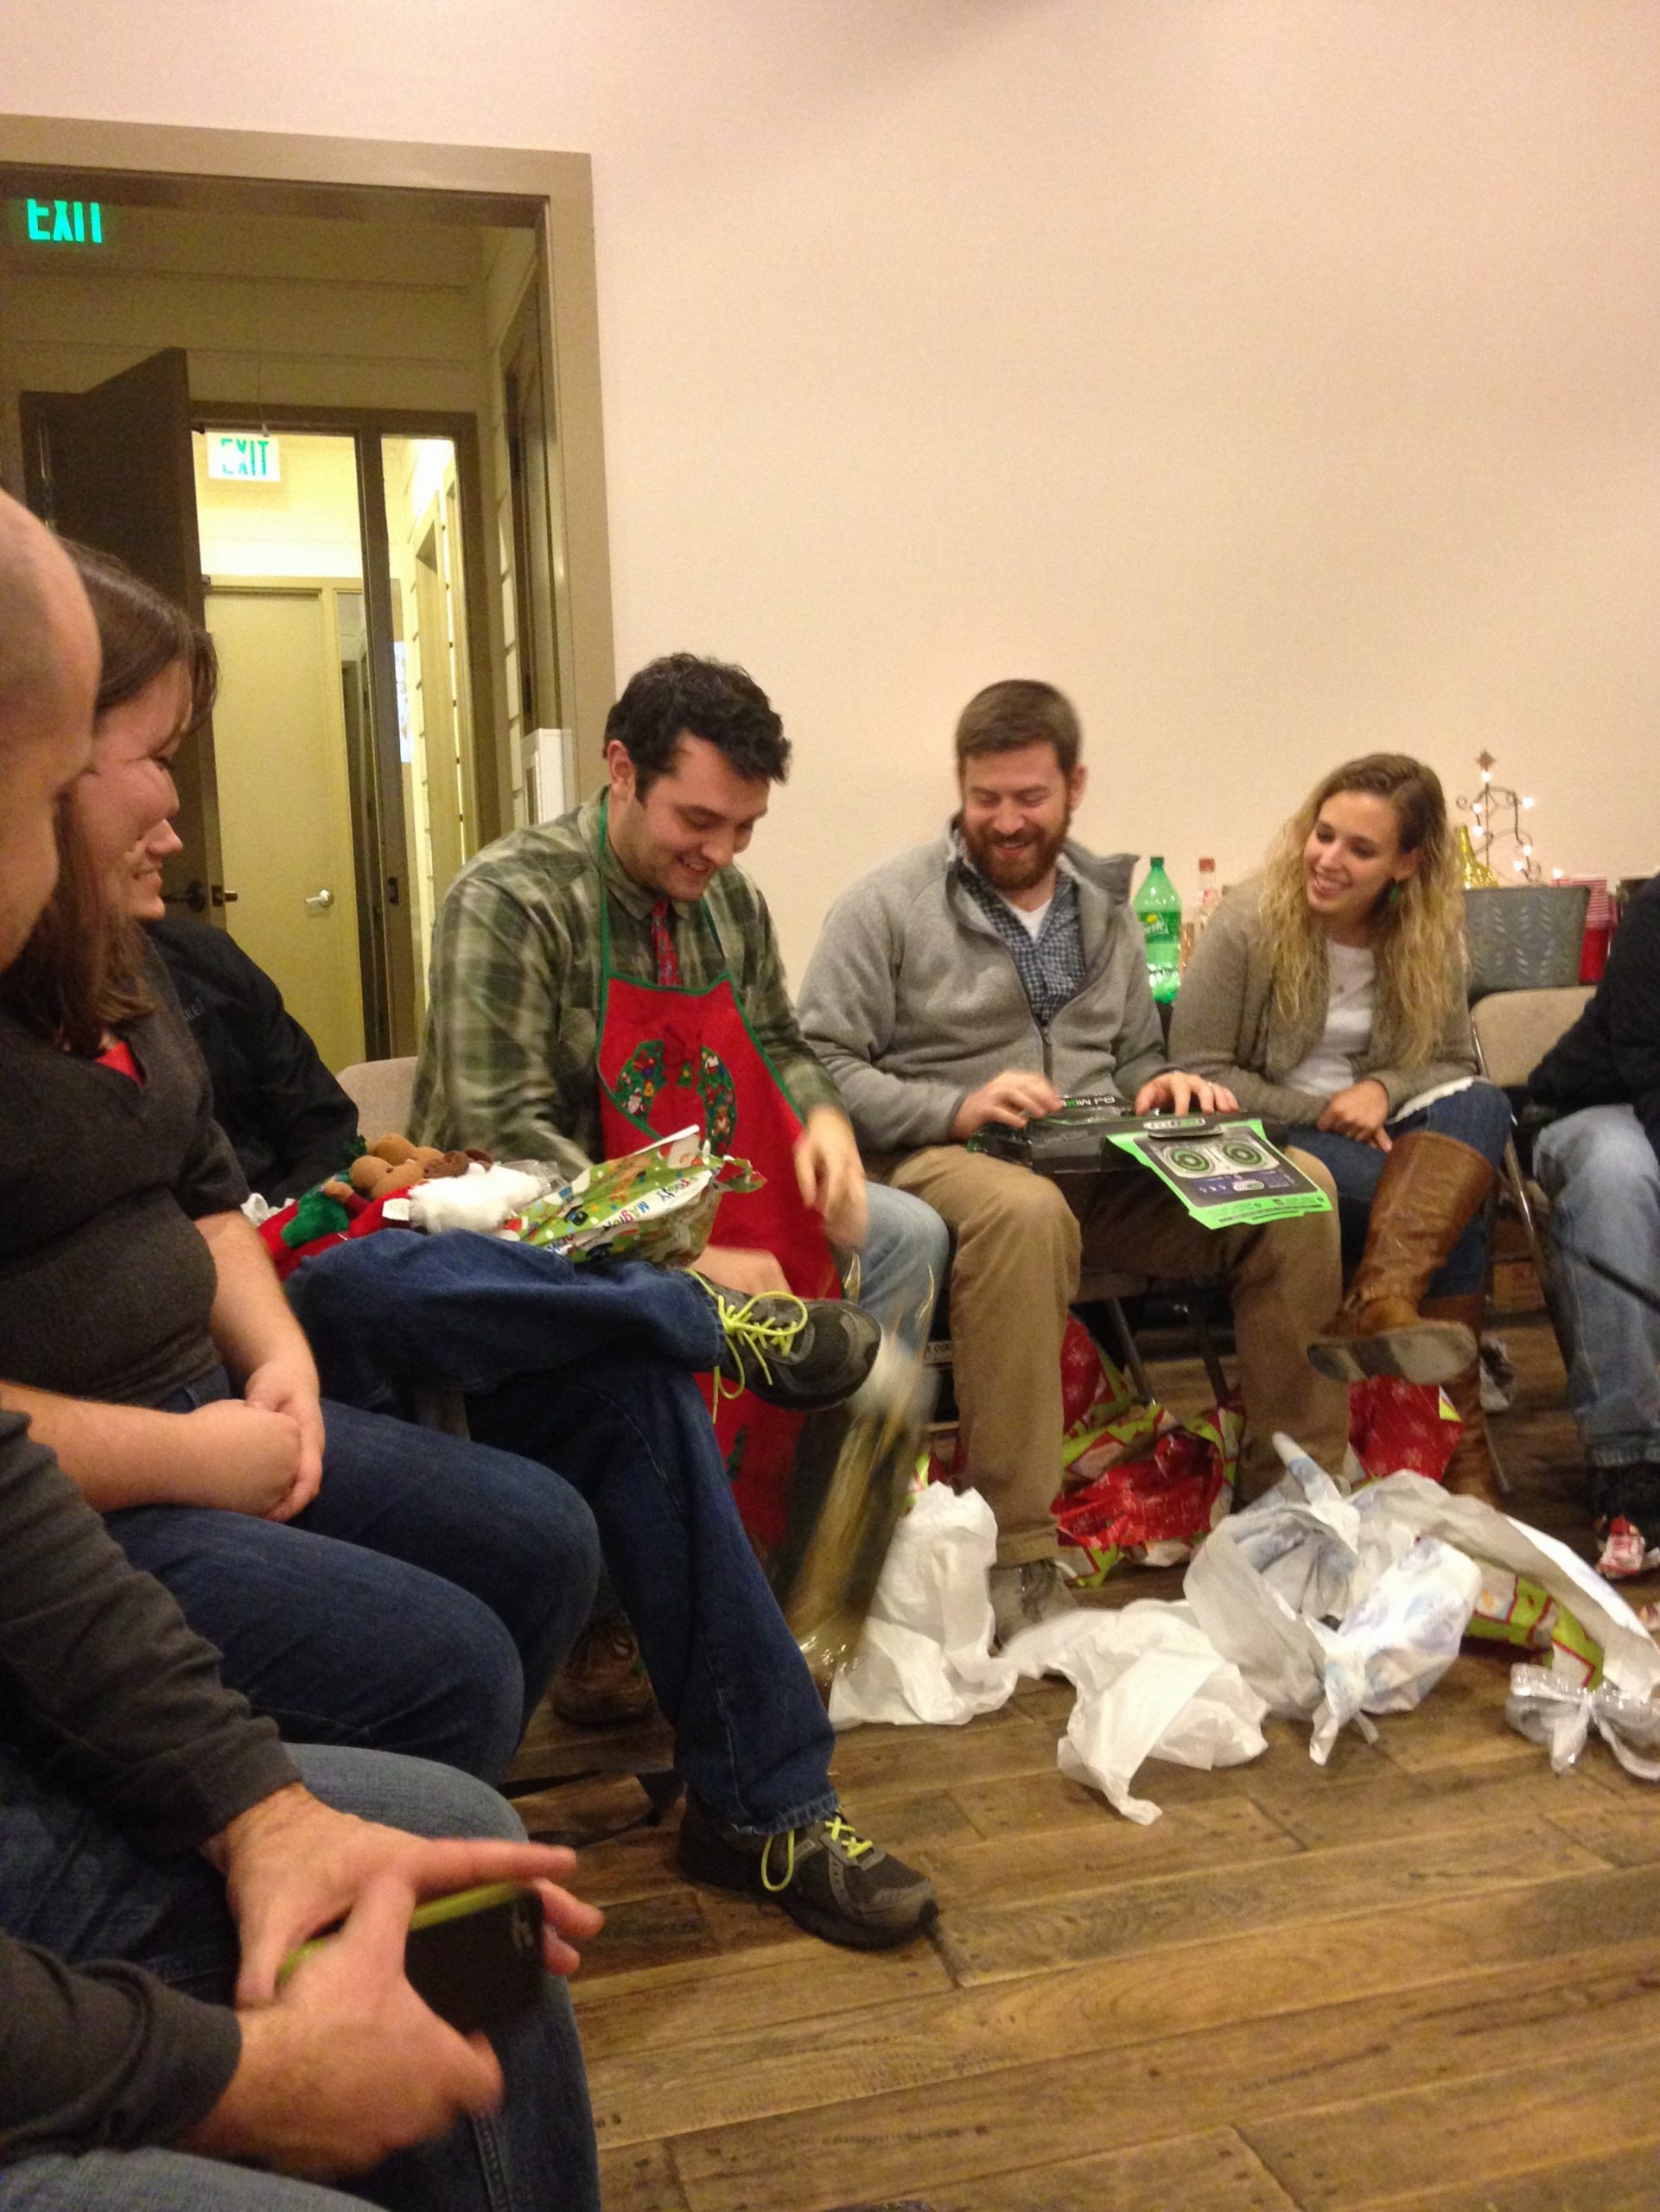 Multiple people sitting around opening Christmas gifts